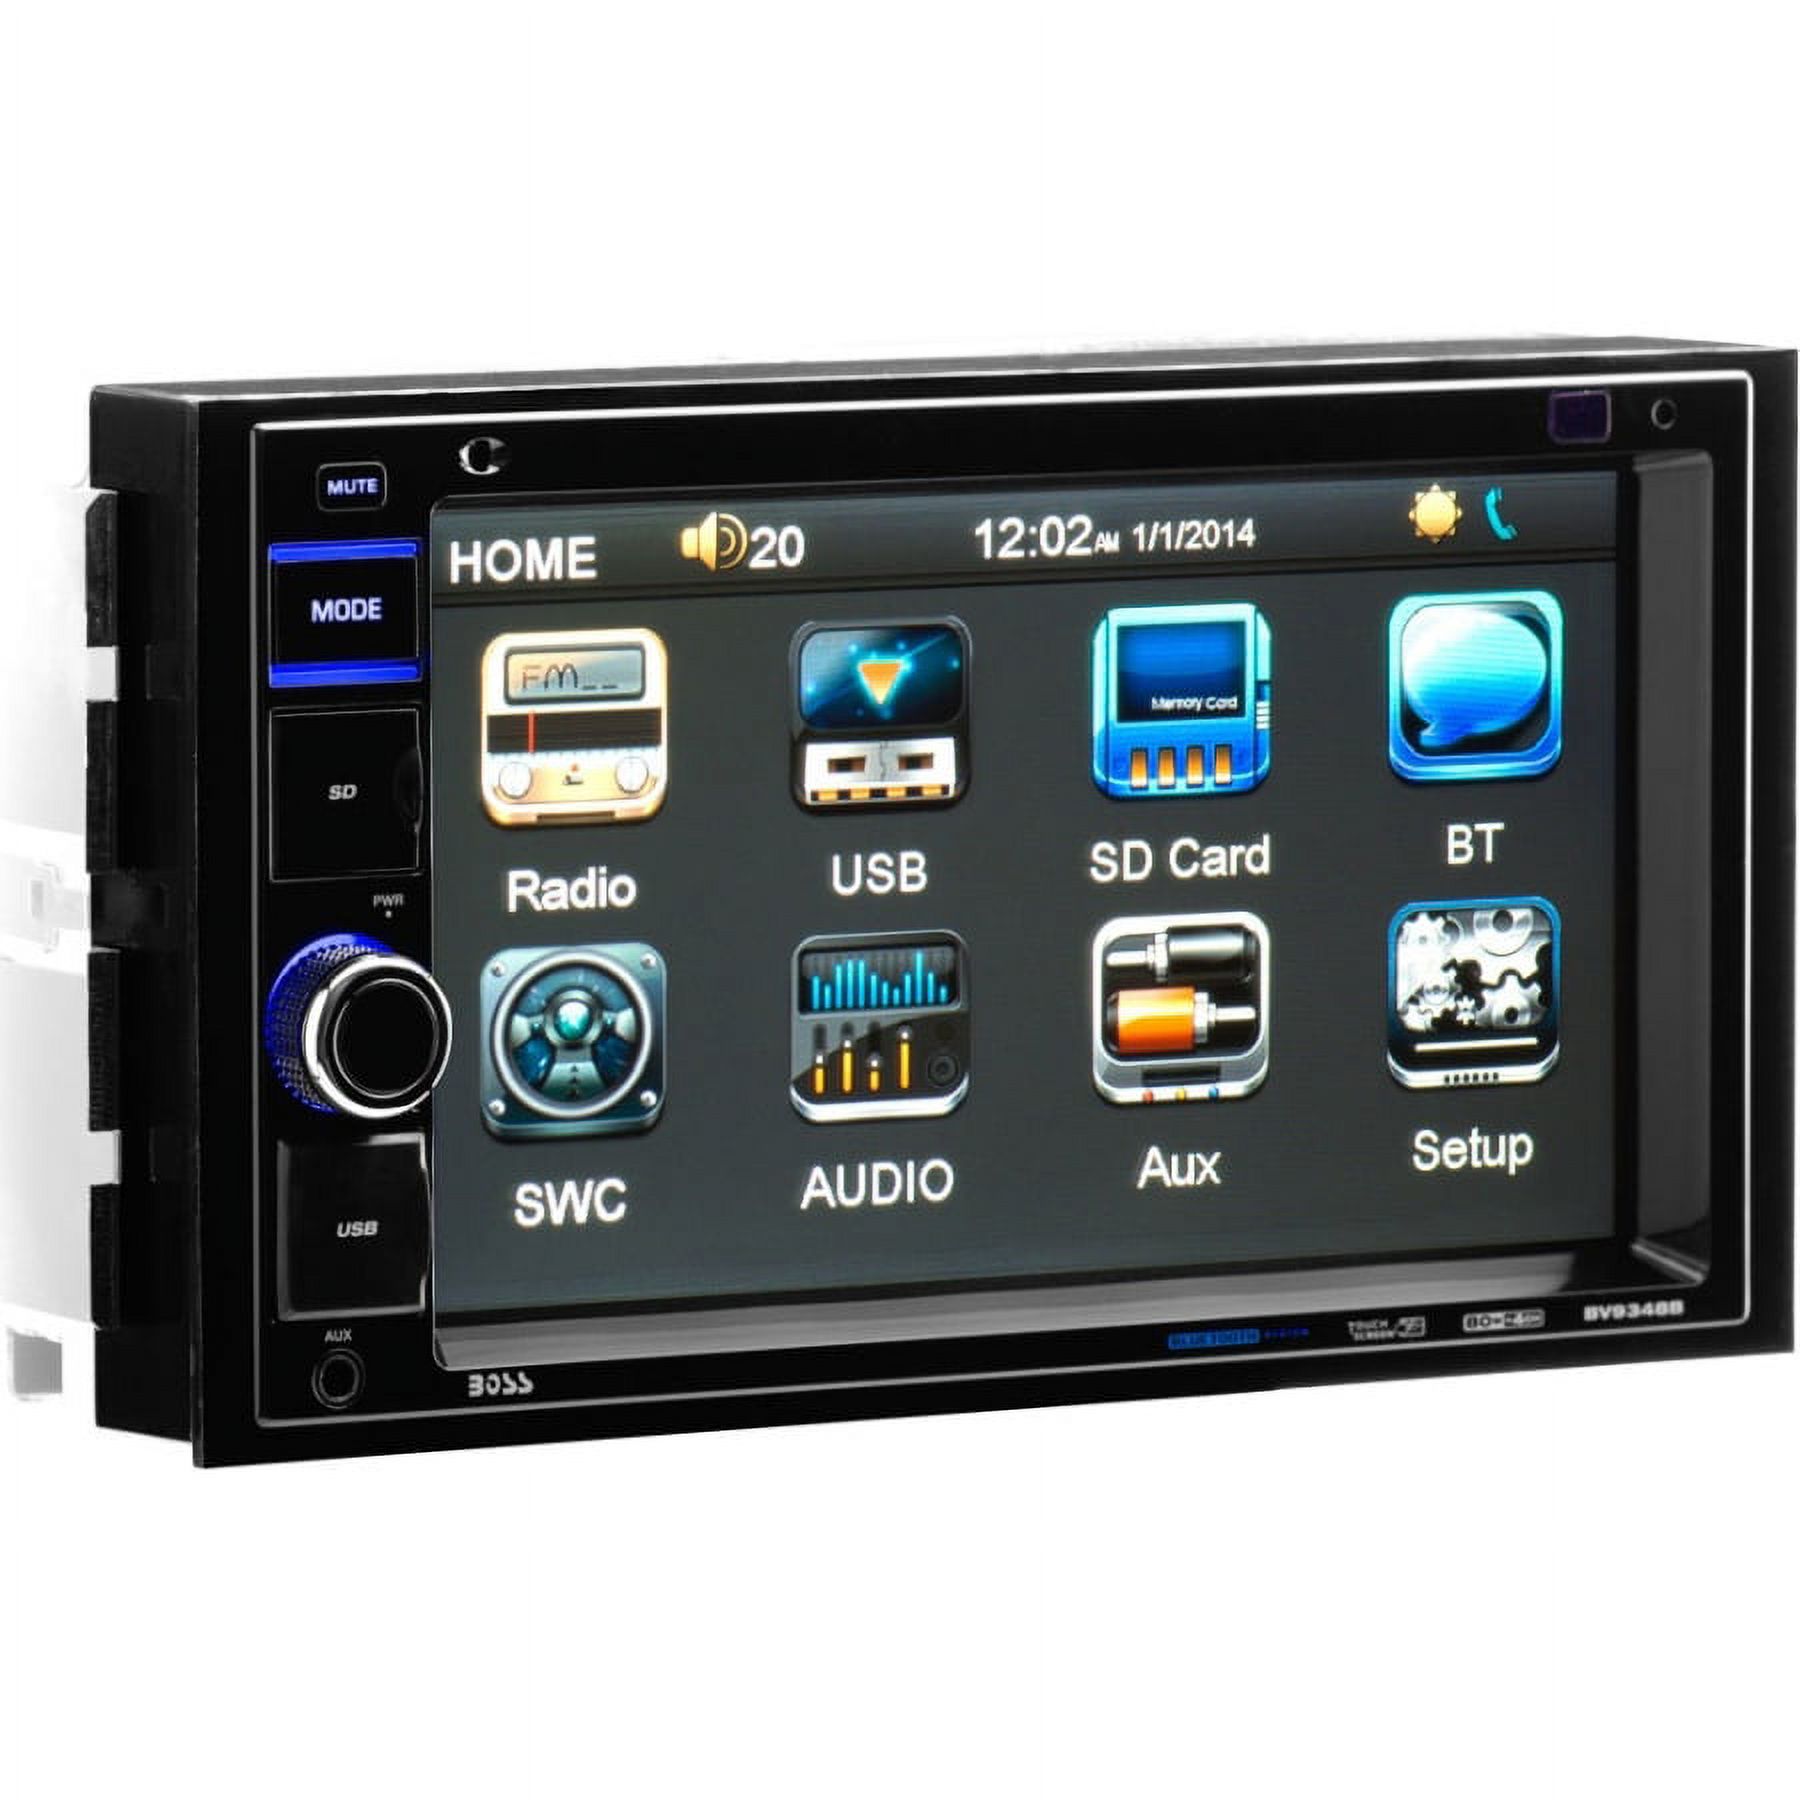 Boss BV9348B 6.2" Touch Mechless Double-DIN with USB/SD/AUX Input - image 2 of 8